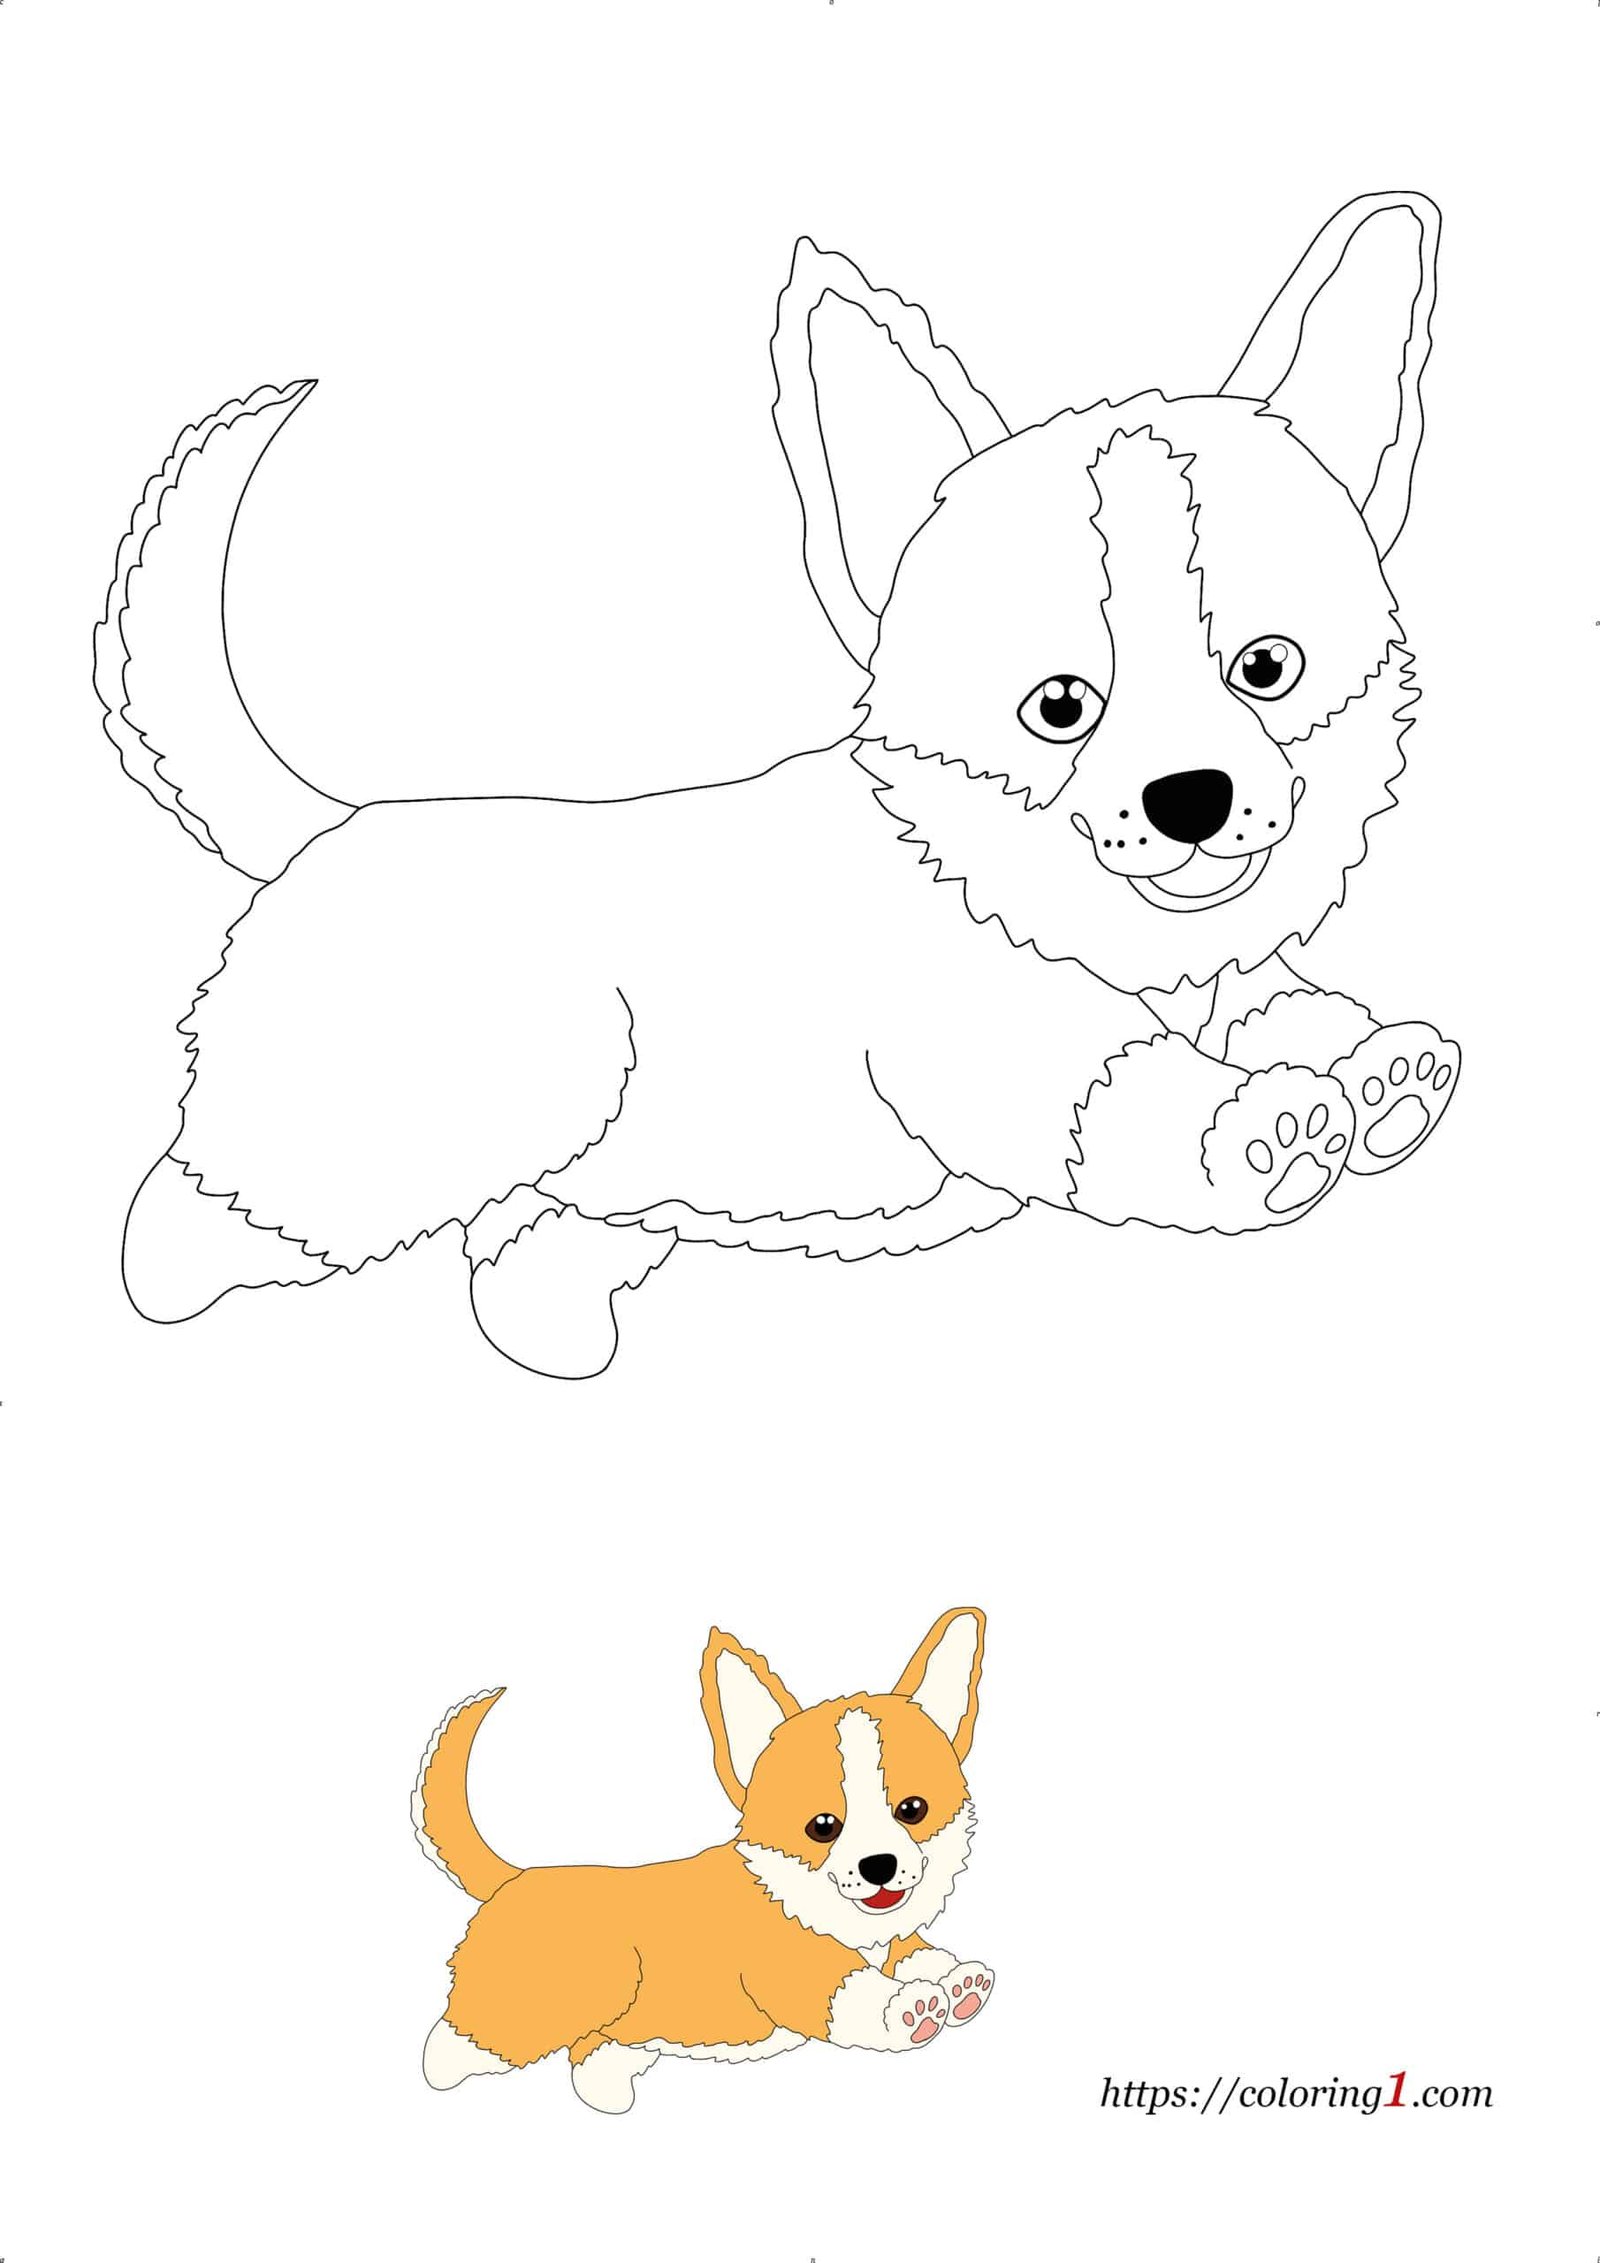 Cute Corgi Dog Breed coloring page for kids and adults